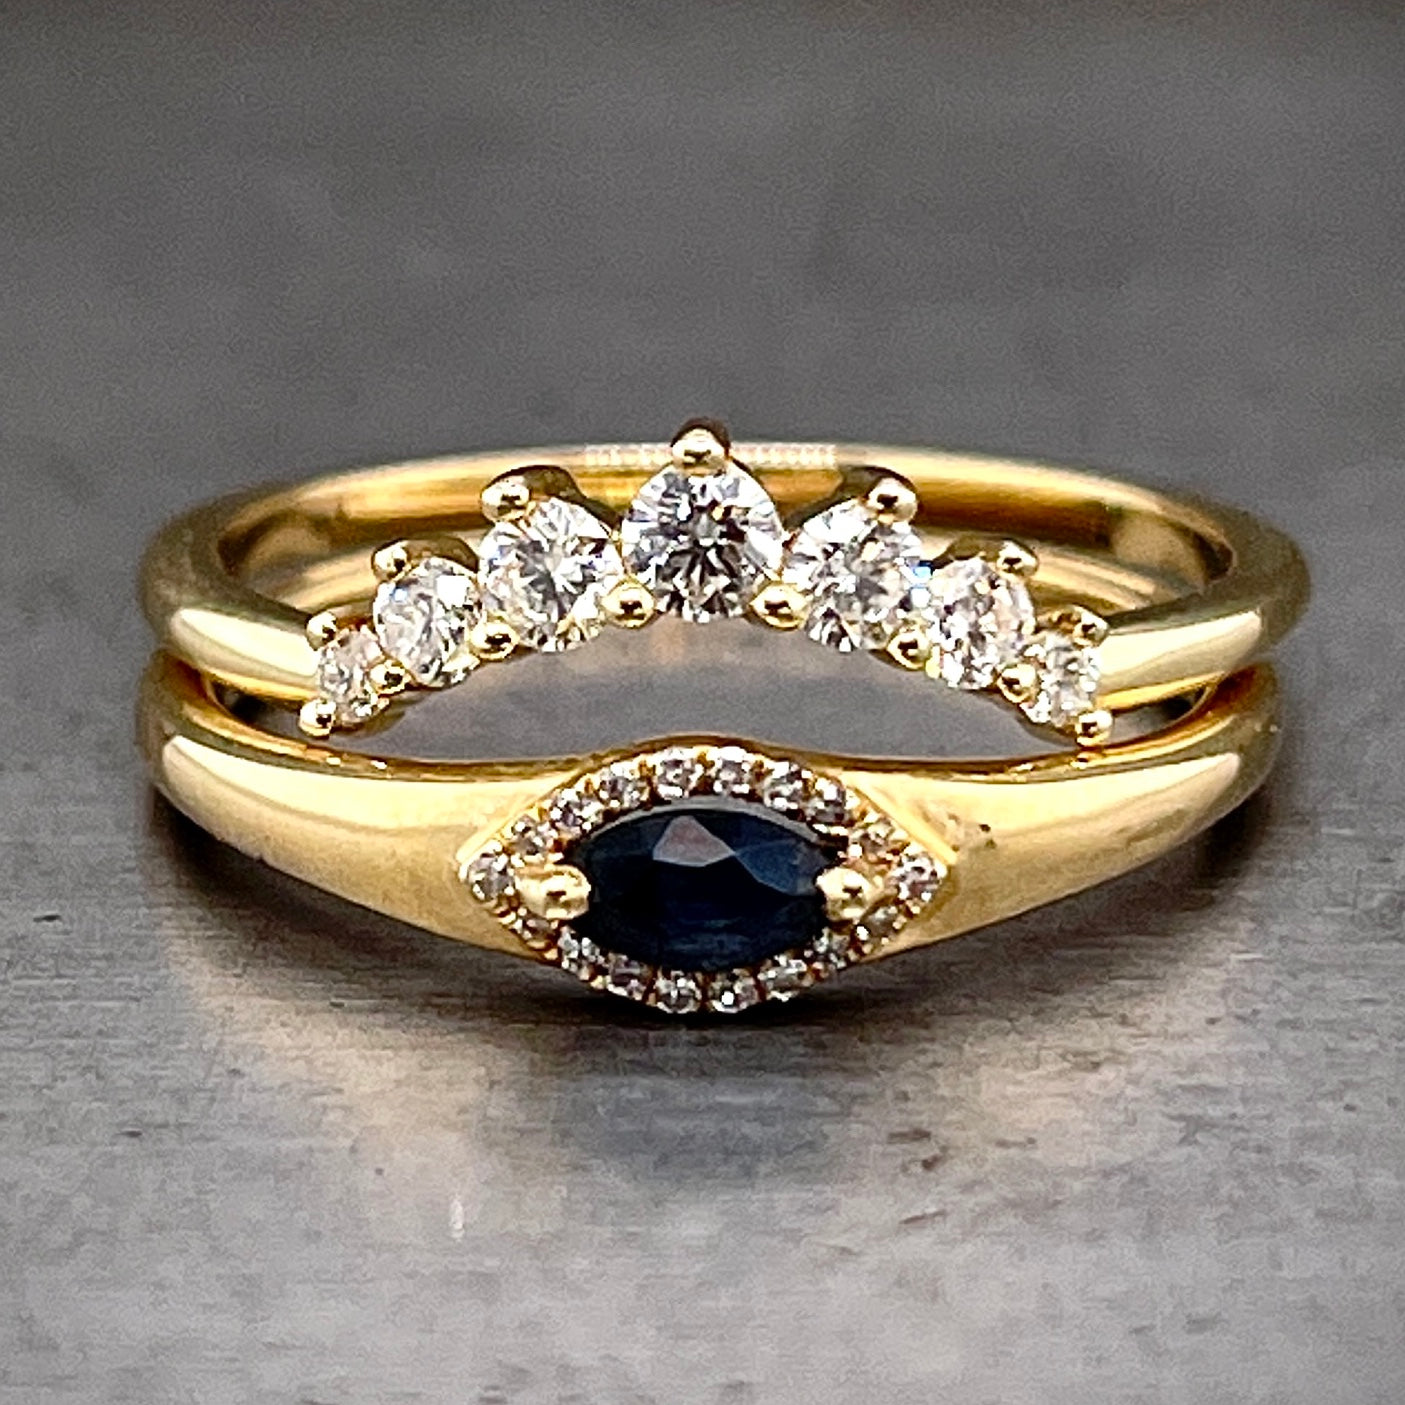 Full view of diamond tiara ring and blue sapphire evil eye ring laying on top of one another. The tiara ring is on top and the sapphire ring is on the bottom.